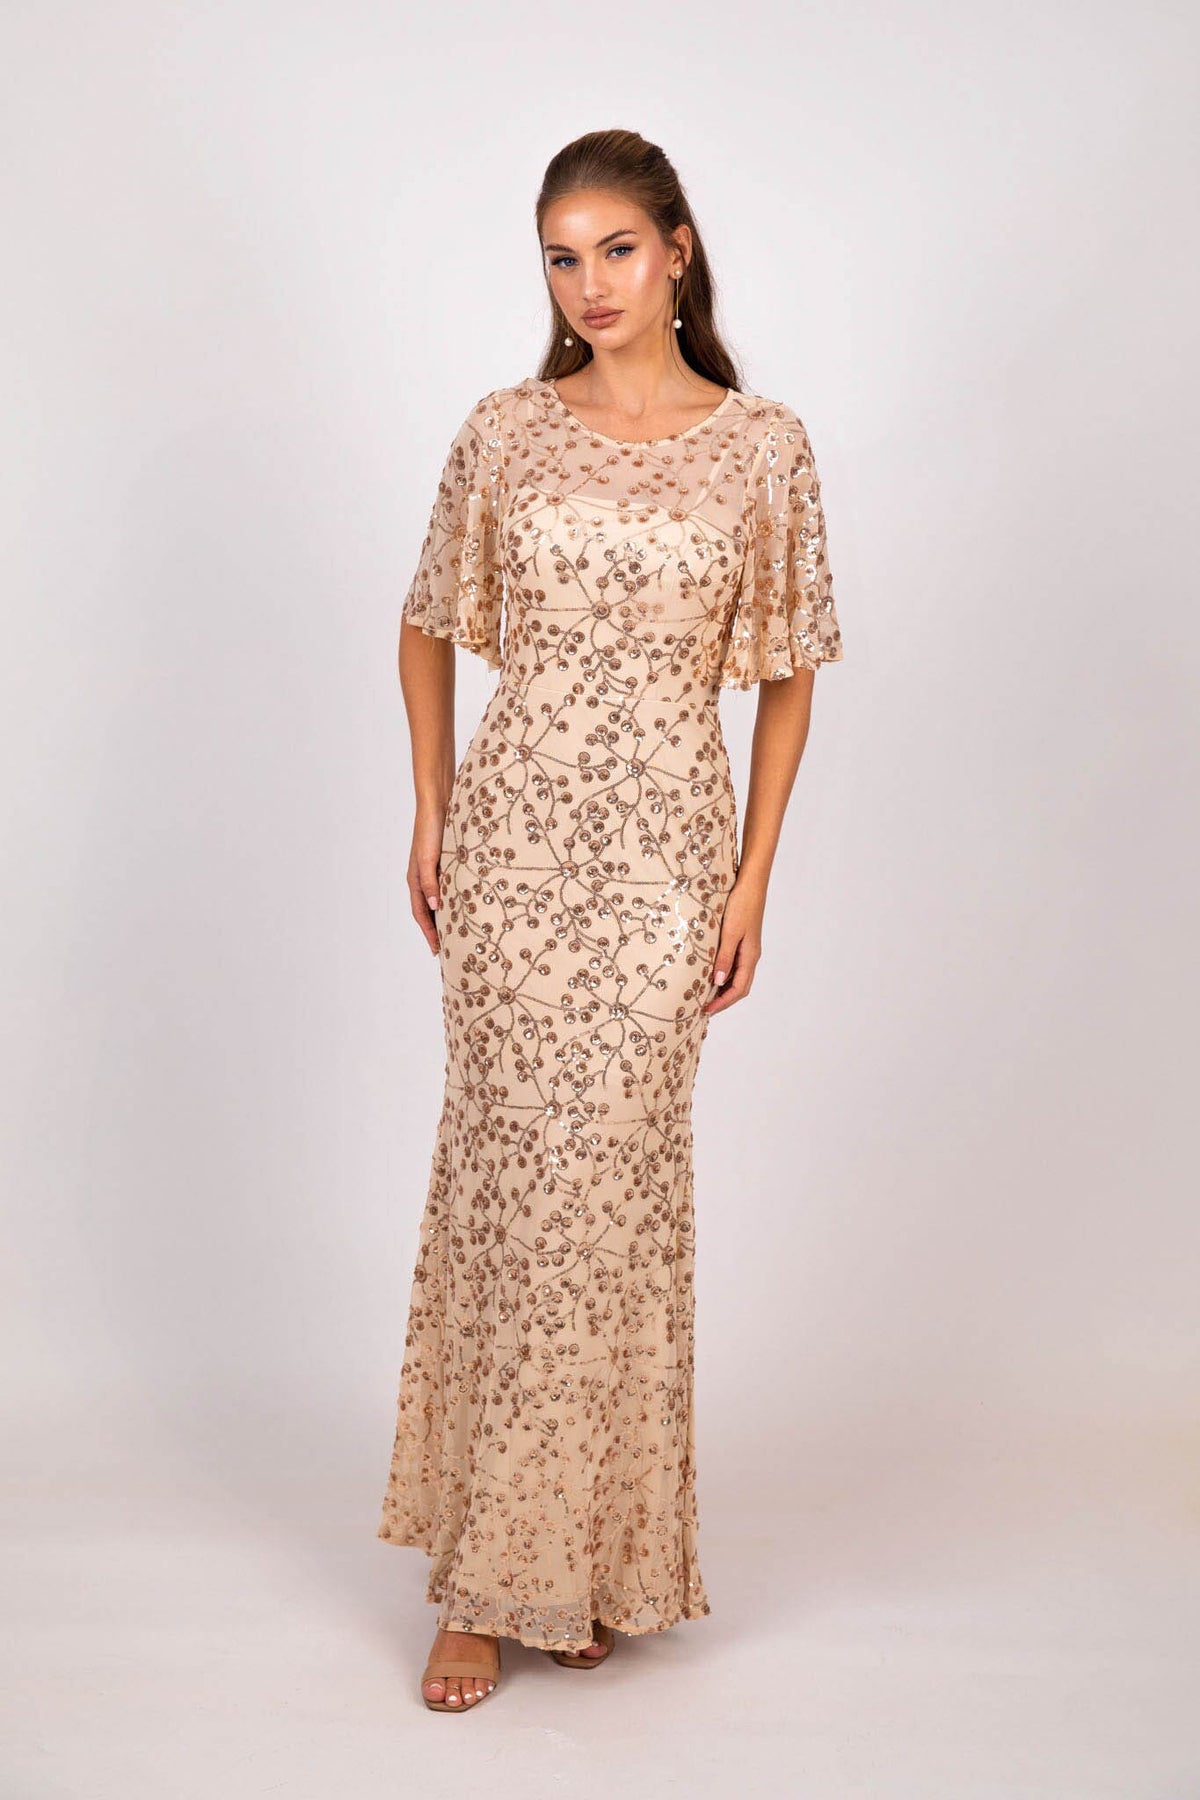 Simona Pattern Sequin Gown - Champagne